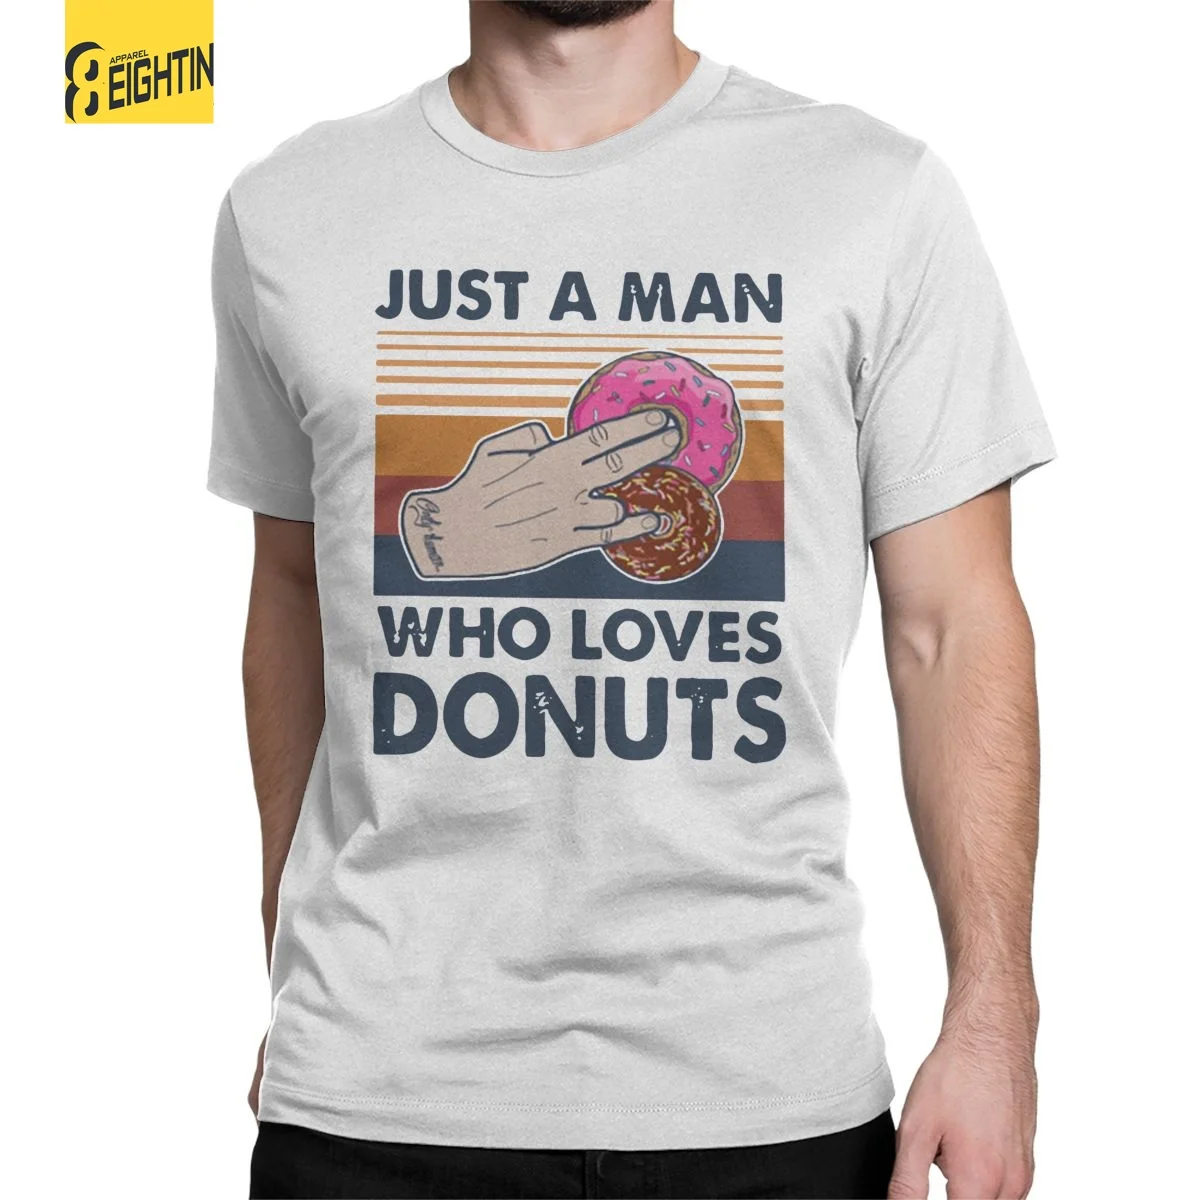 

Just A Man Who Loves Donuts T Shirt for Men Pure Cotton Casual T-Shirts O Neck Tee Shirt Short Sleeve Clothing Plus Size